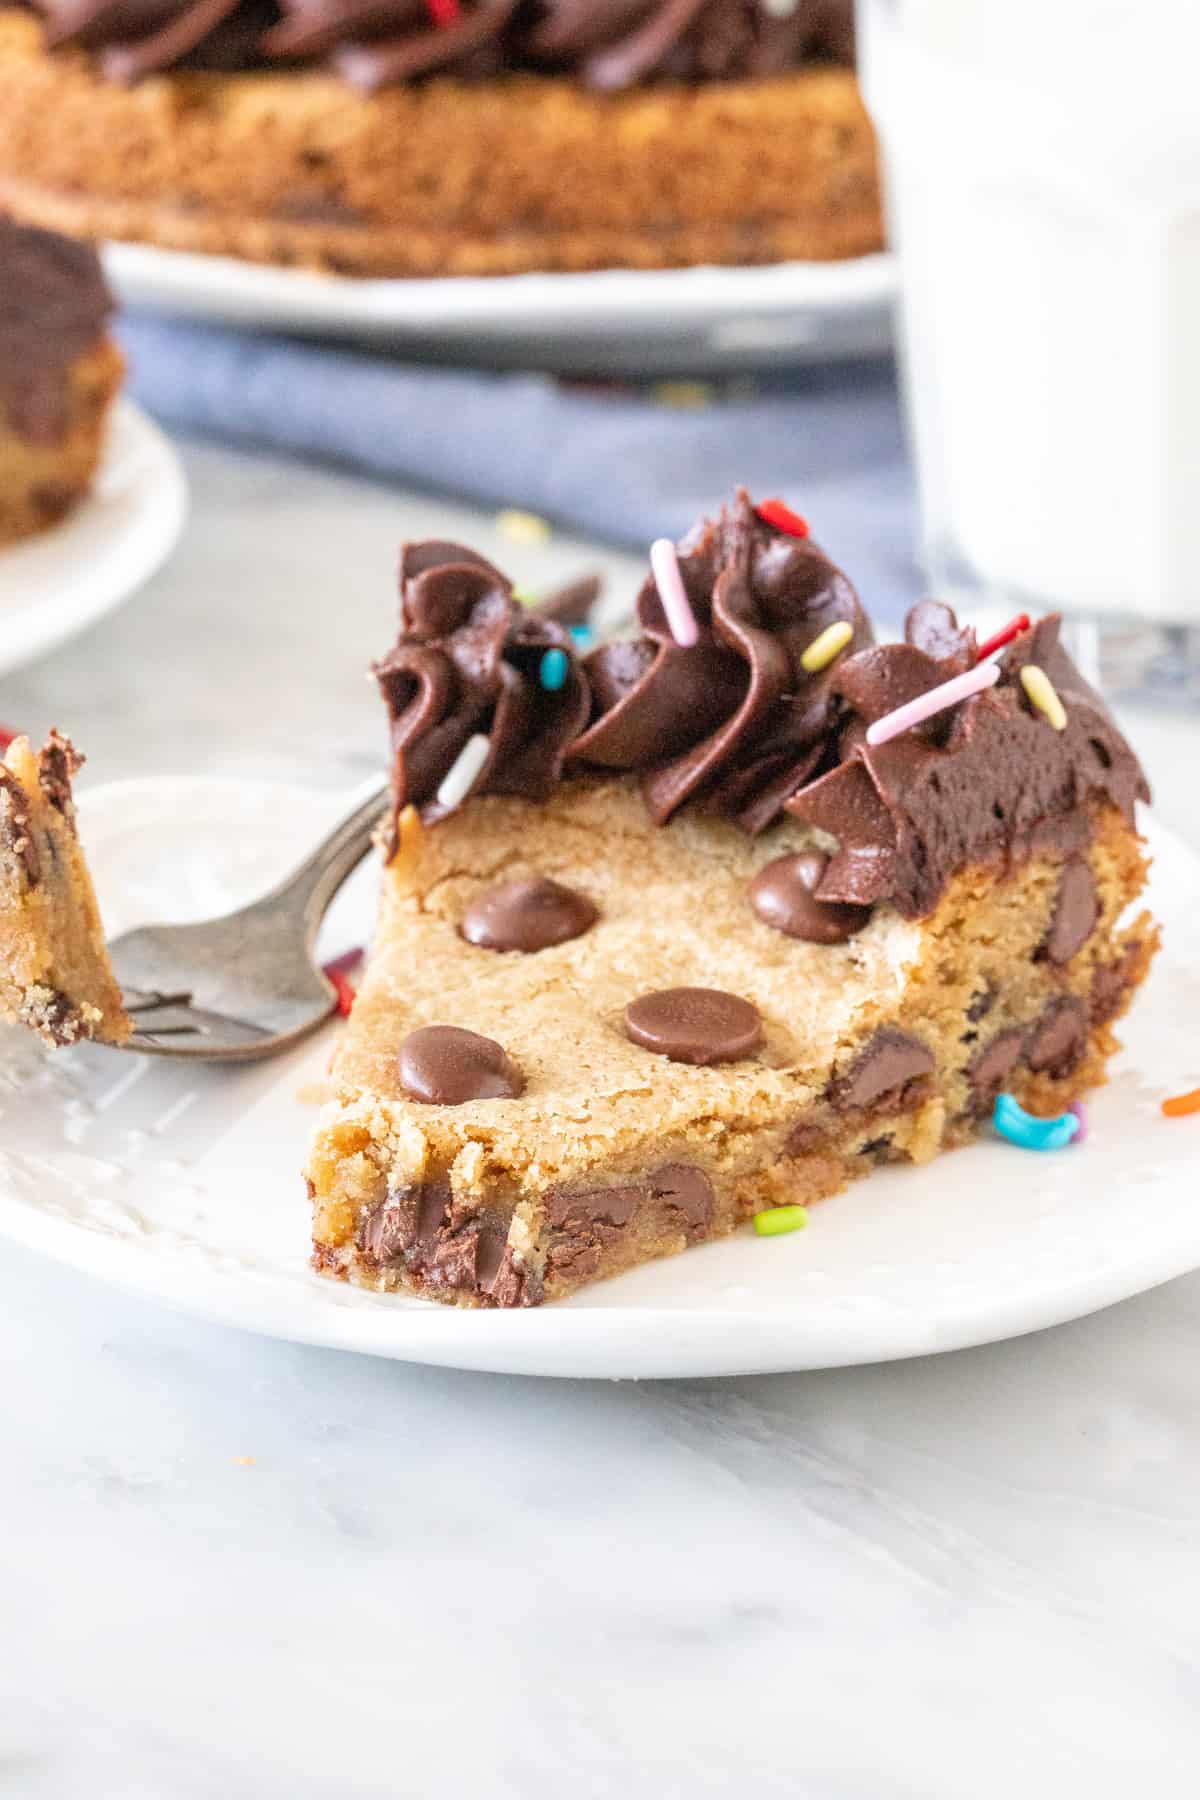 Slice of chocolate chip cookie cake with a bite taken out.